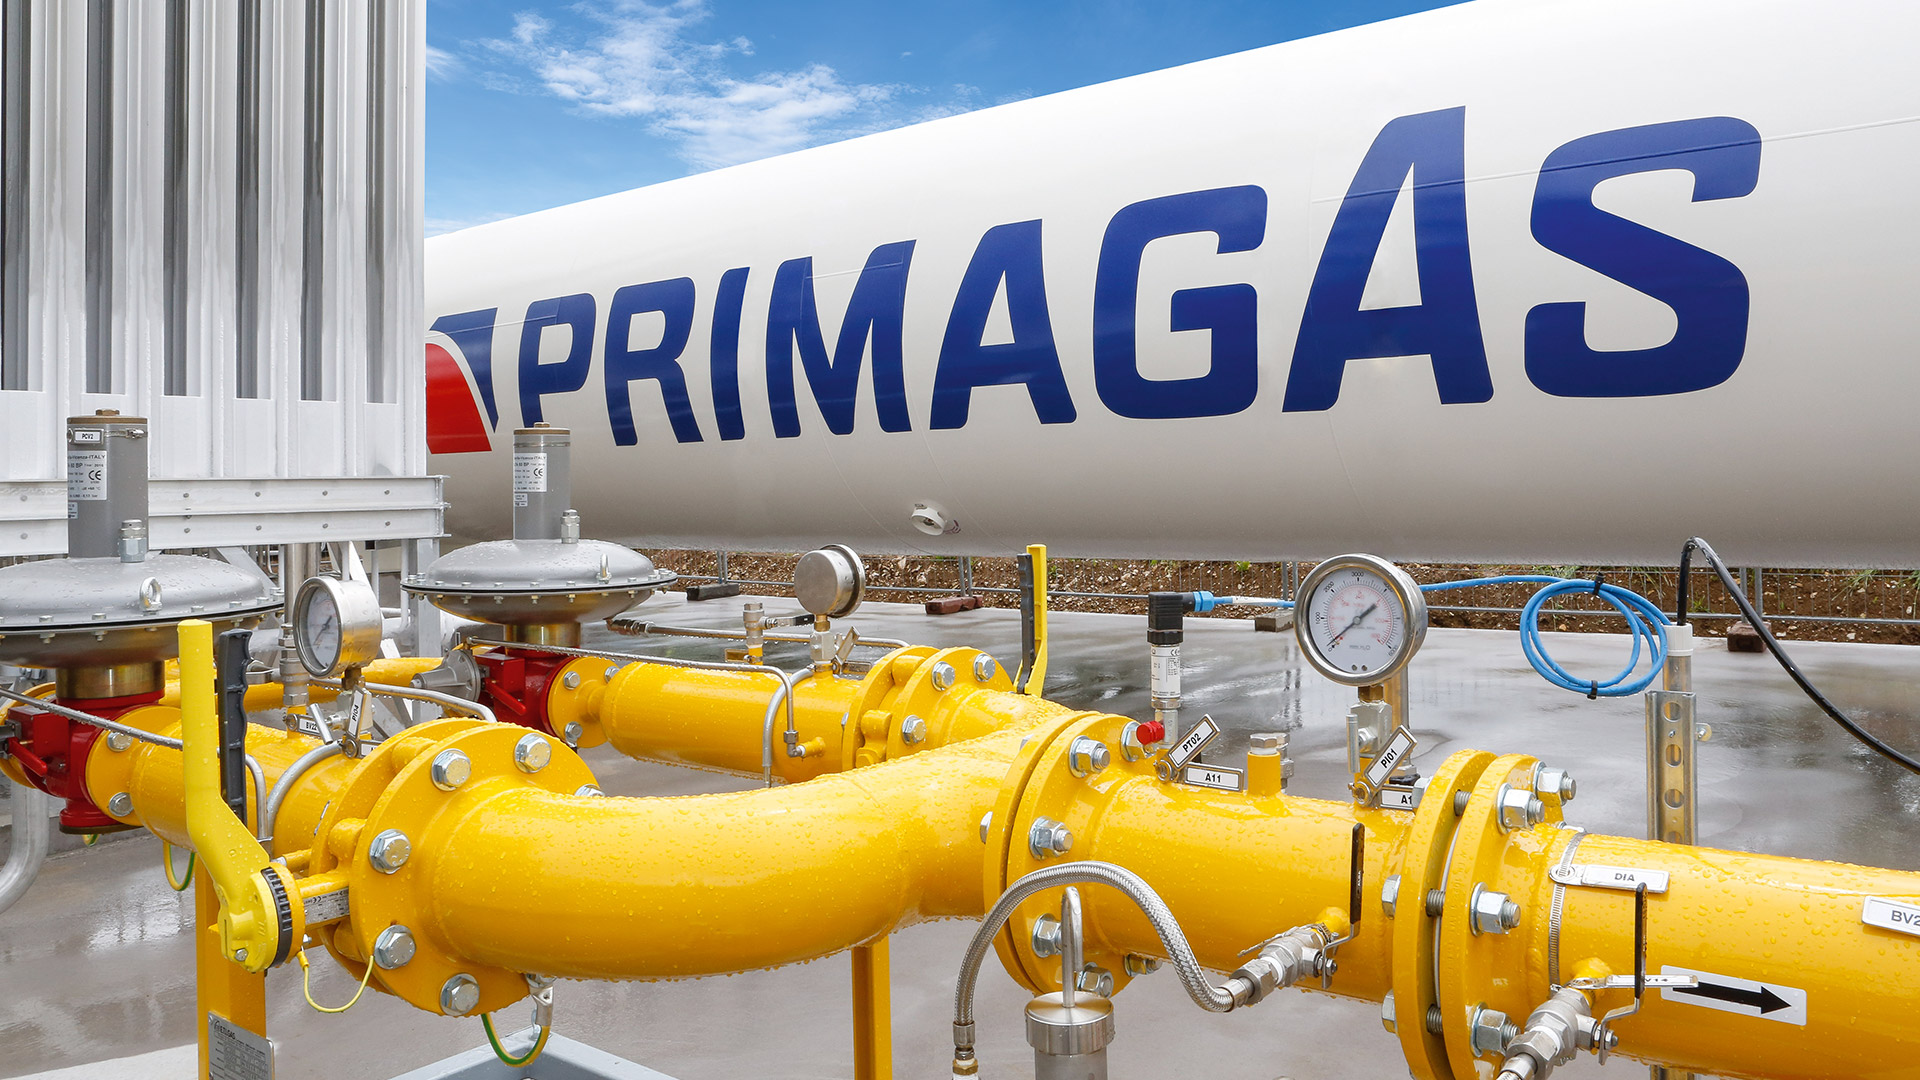 PRIMAGAS - Was ist LNG? - LKW, Tank, LNG-Anlage